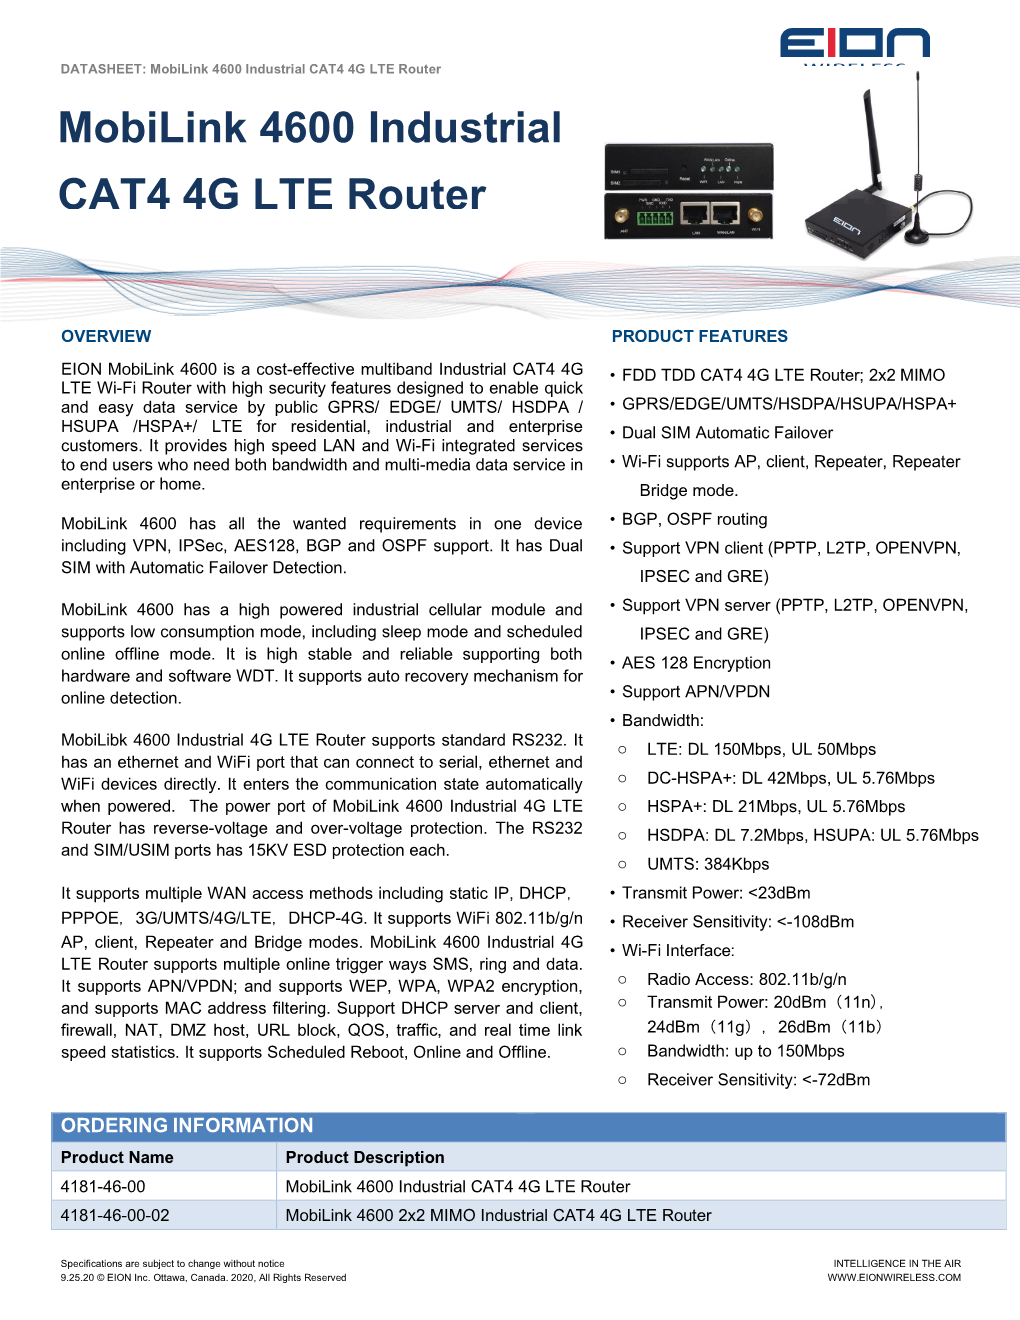 Mobilink 4600 Industrial CAT4 4G LTE Router Mobilink 4600 Industrial CAT4 4G LTE Router